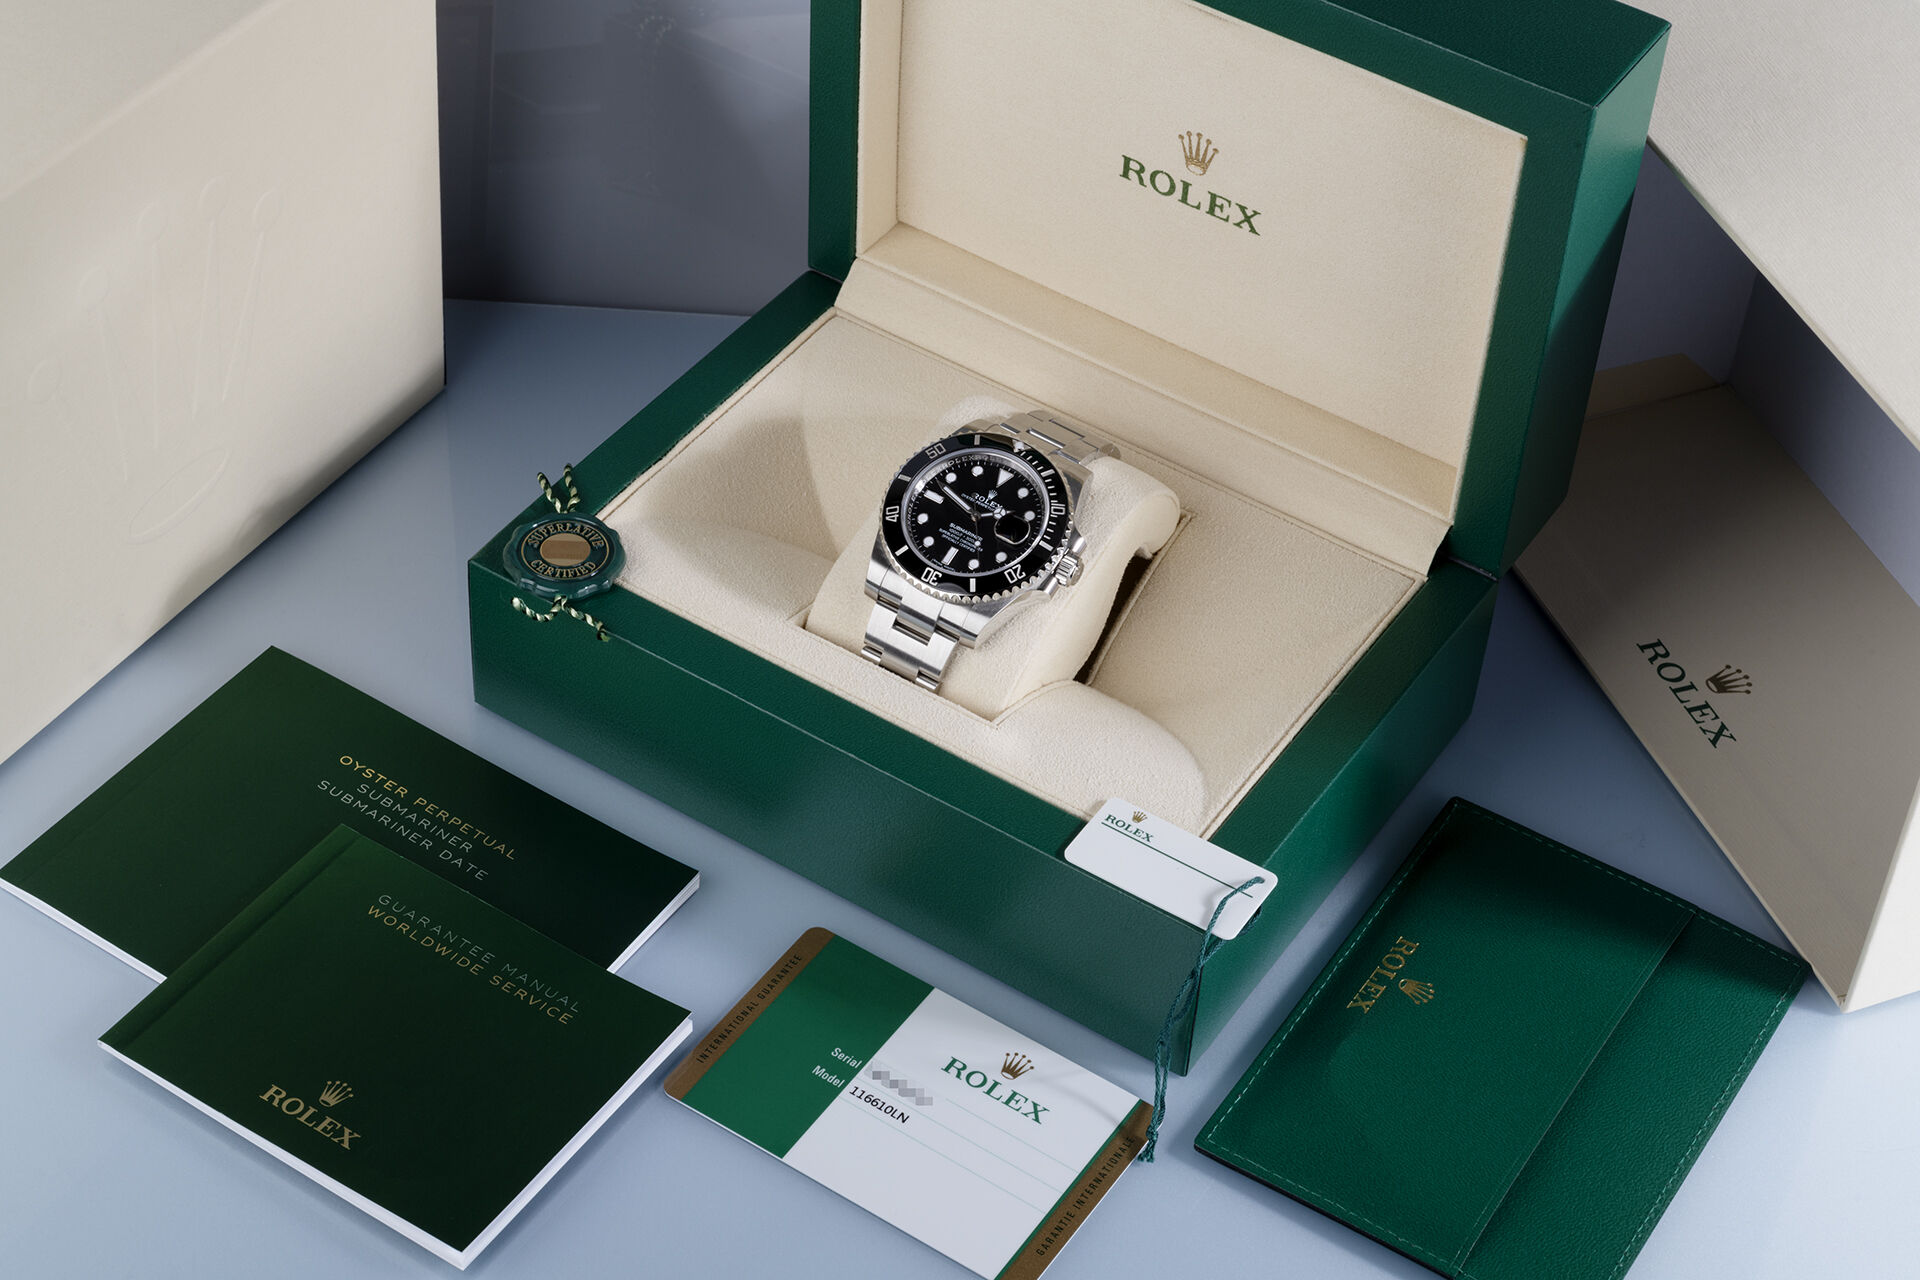 ref 116610LN | Discontinued - UK Purchased | Rolex Submariner Date